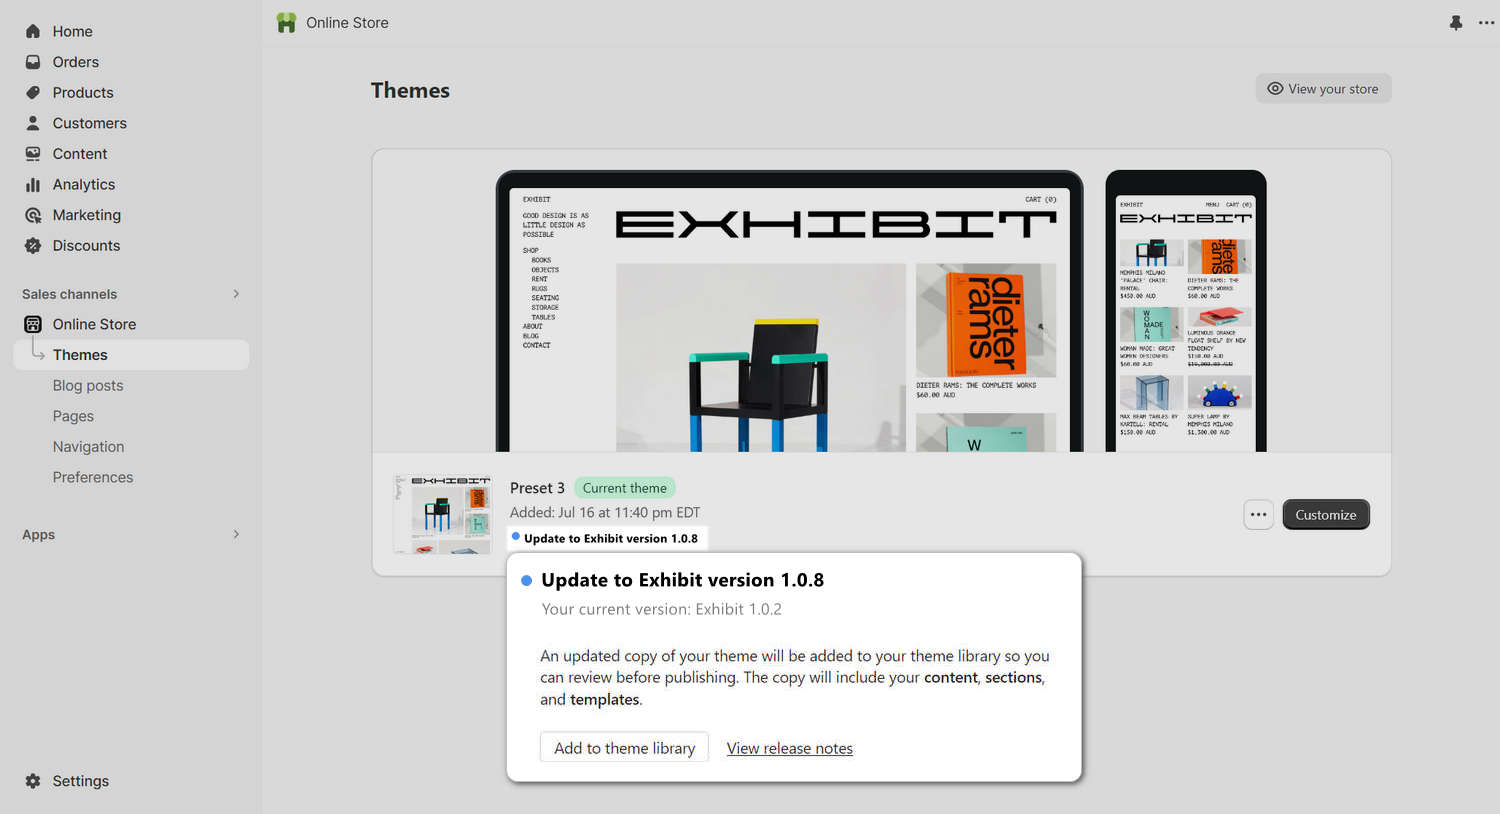 Screenshot of the Exhibit theme on the Shopify Theme Store with an Add to theme library button.